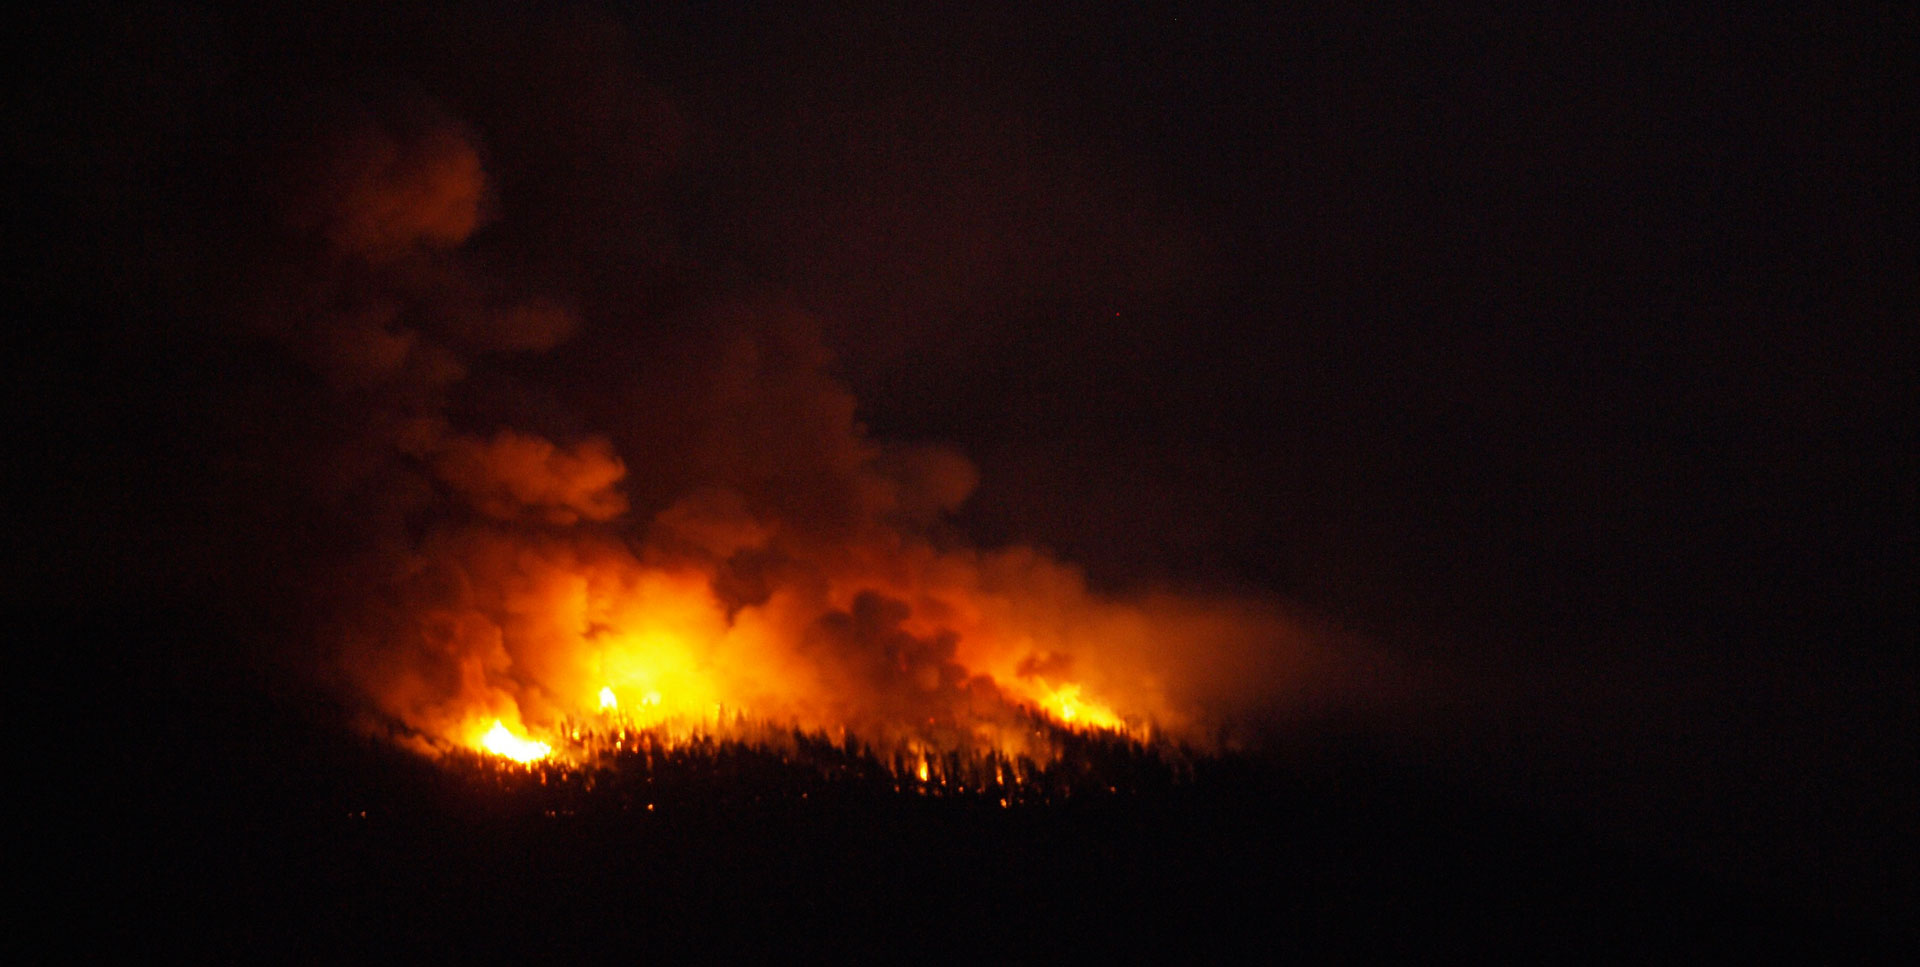 Firefighters lit a "back-burn" to control the Reading Fire in 2012.